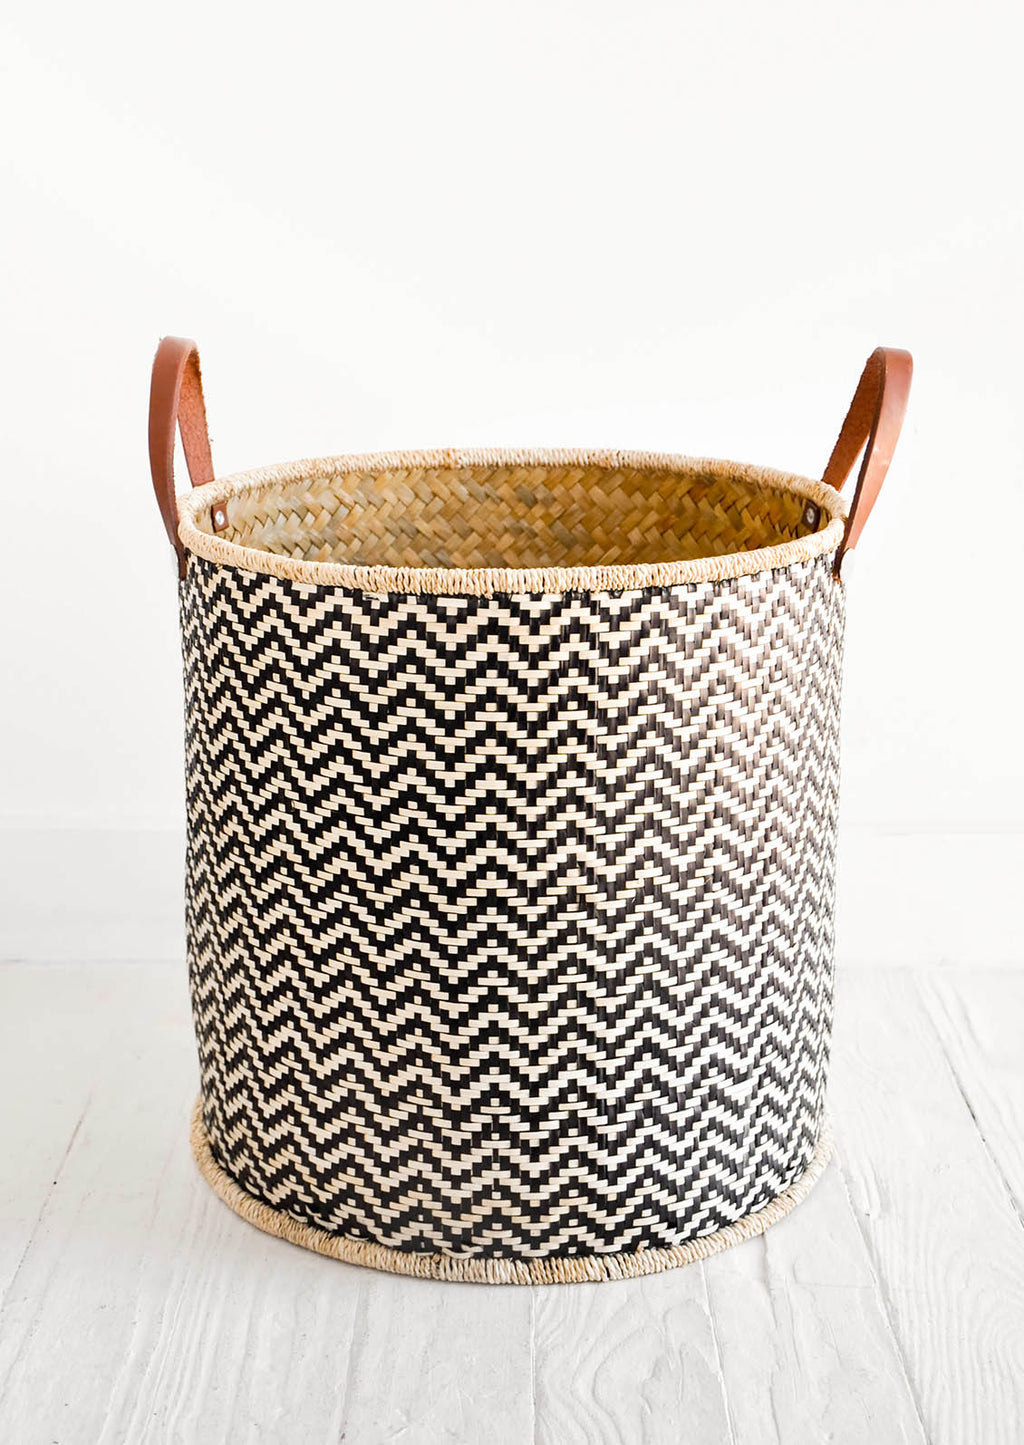 1: Round storage bin in natural material with allover black zigzag pattern and leather handles